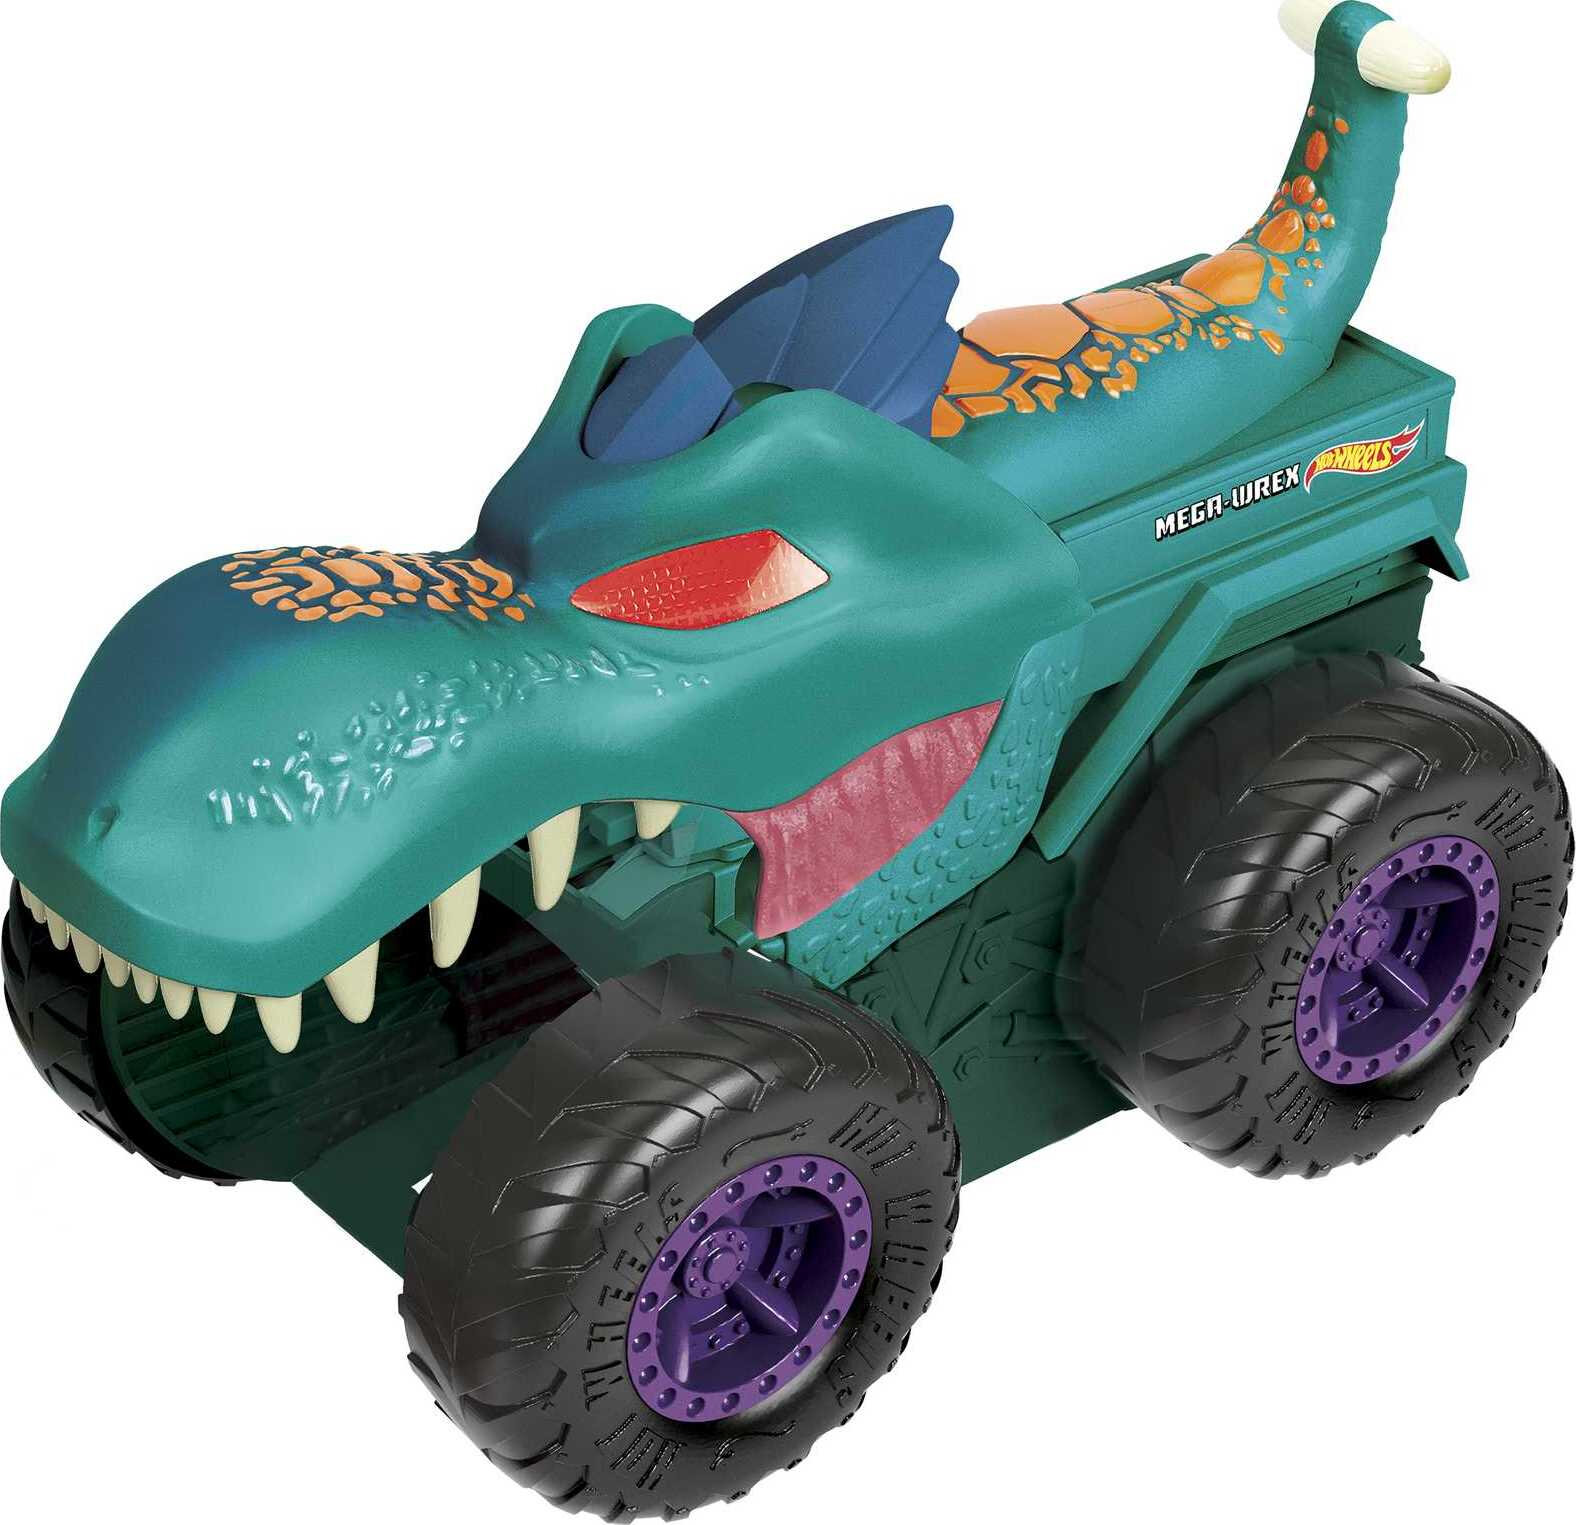 Hot Wheels Monster Trucks Car Chompin’ Mega Wrex Vehicle, for Ages 3 Years & Up - image 1 of 7